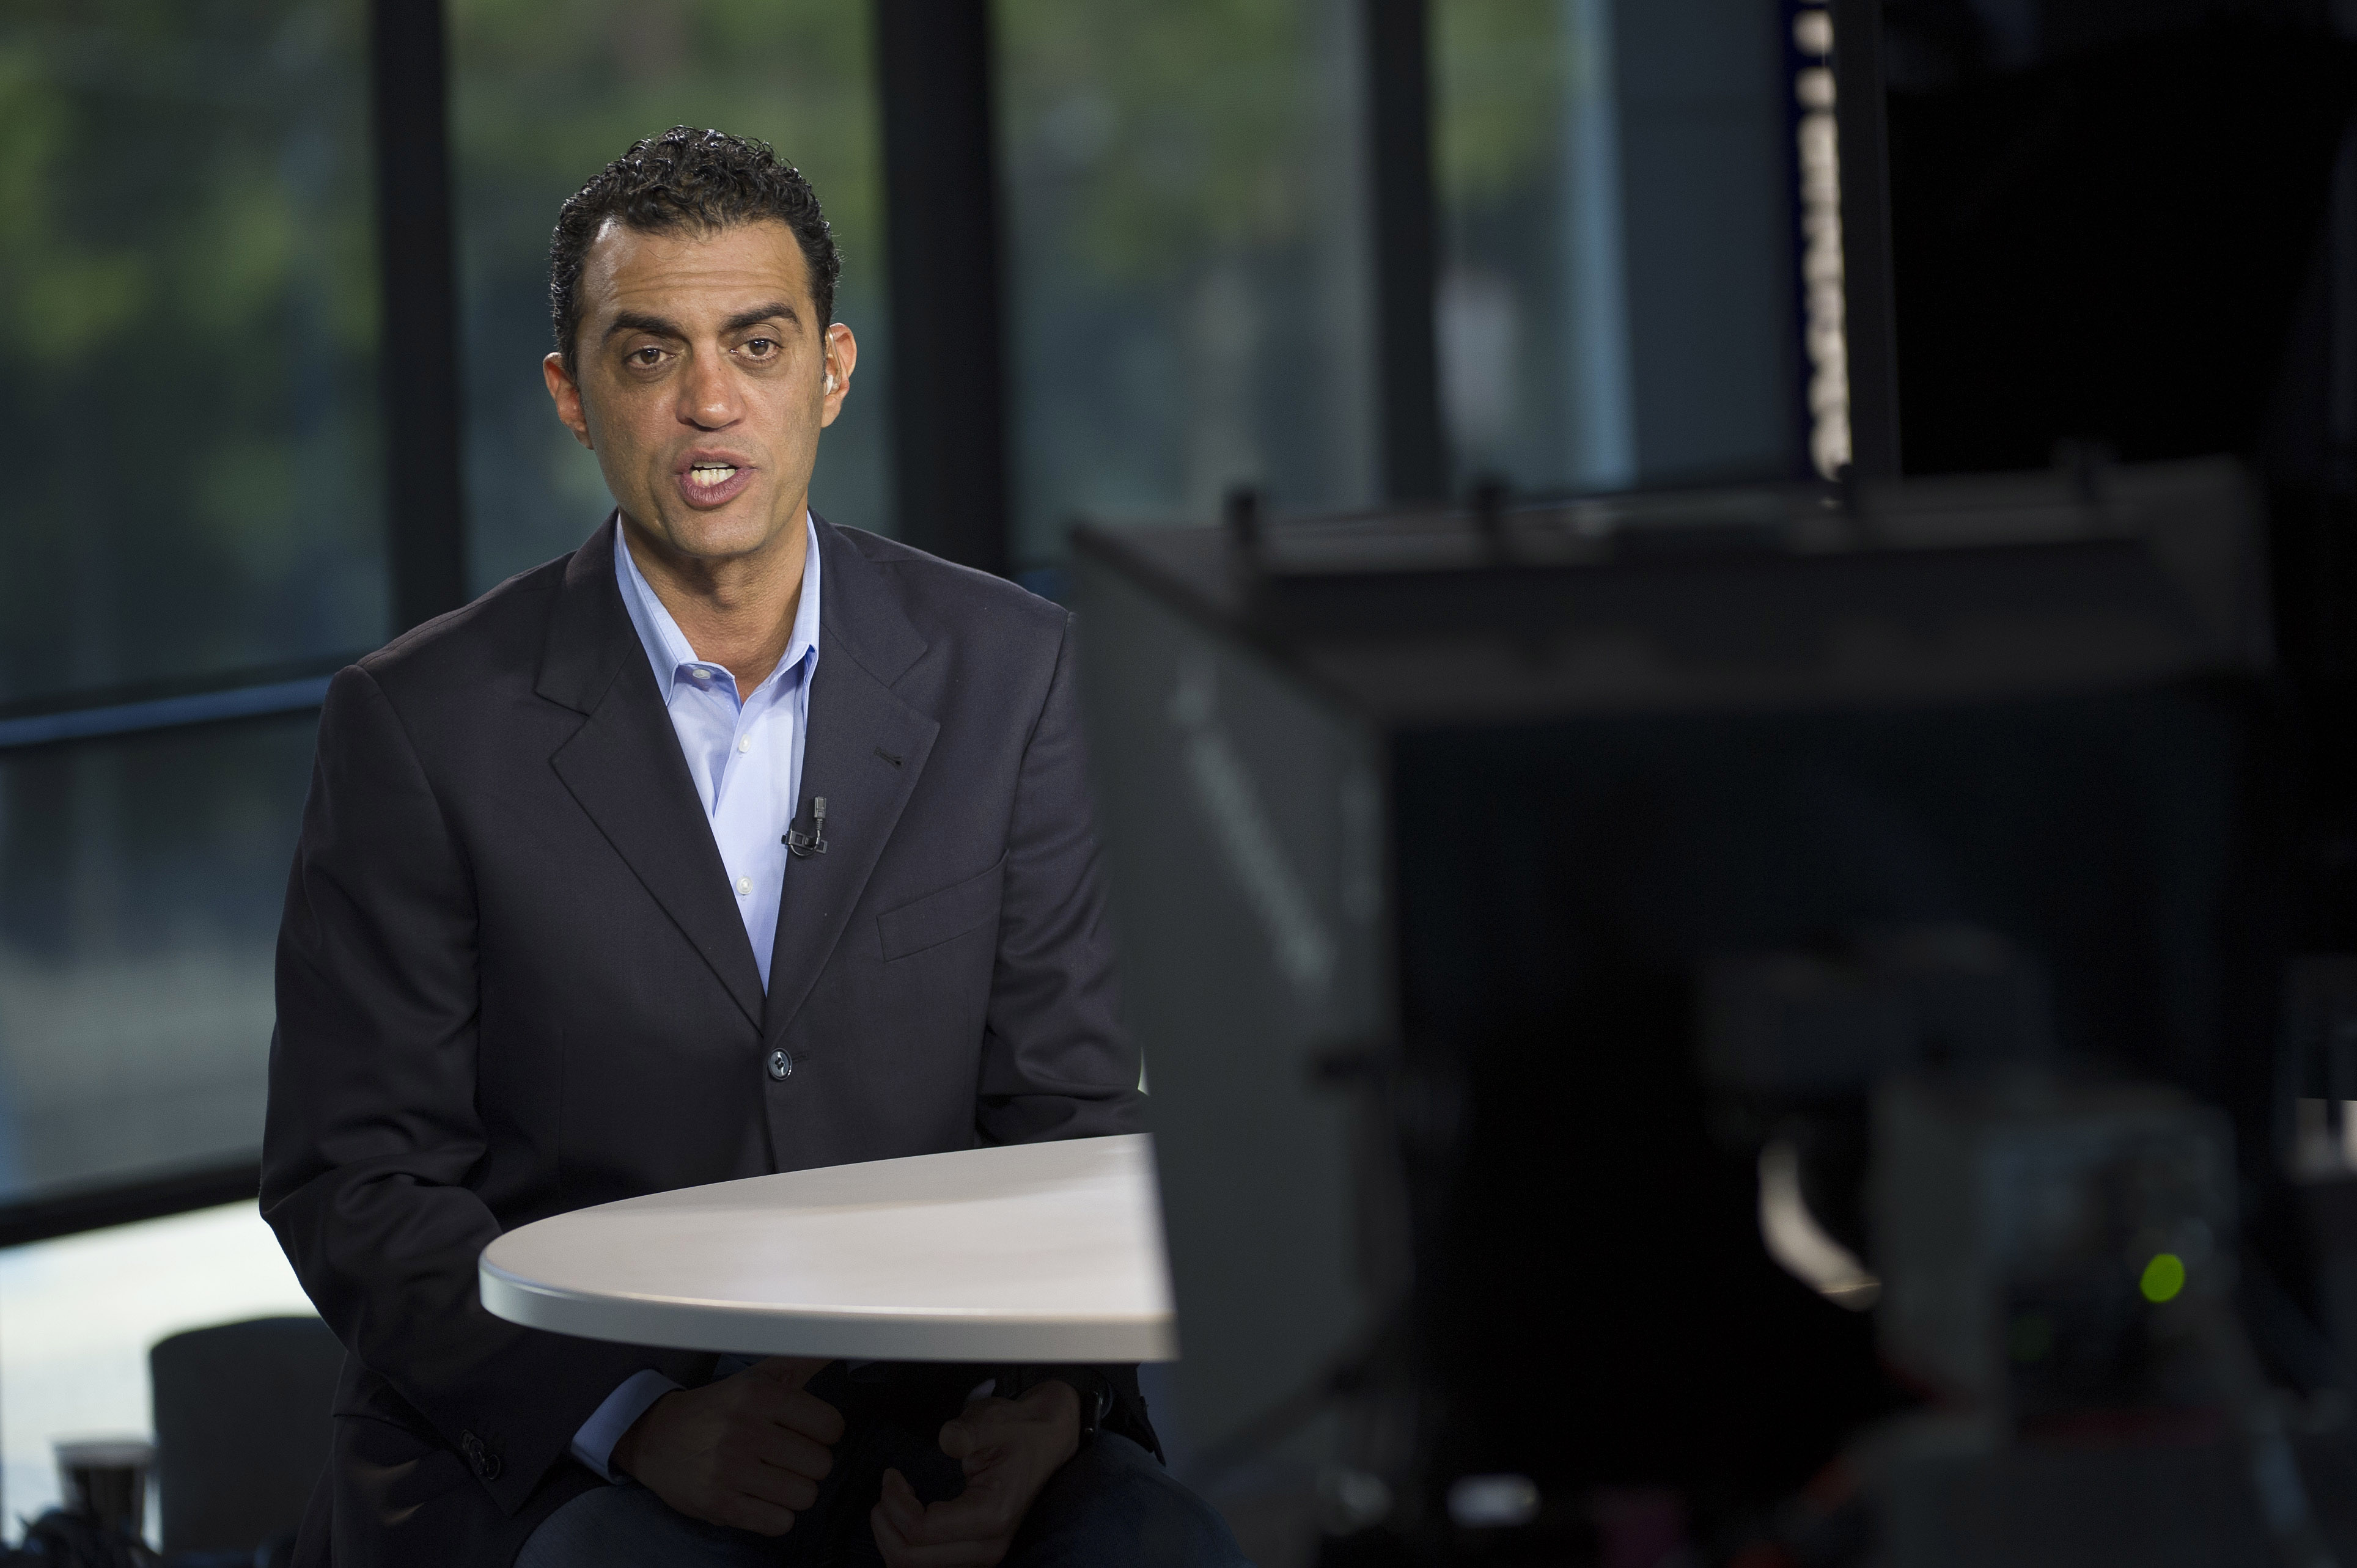 Emil Michael, senior vice president of business for Uber Technologies Inc., speaks during a Bloomberg Television interview in San Francisco, California, U.S., on Tuesday, July 29, 2014. (Bloomberg—Bloomberg via Getty Images)